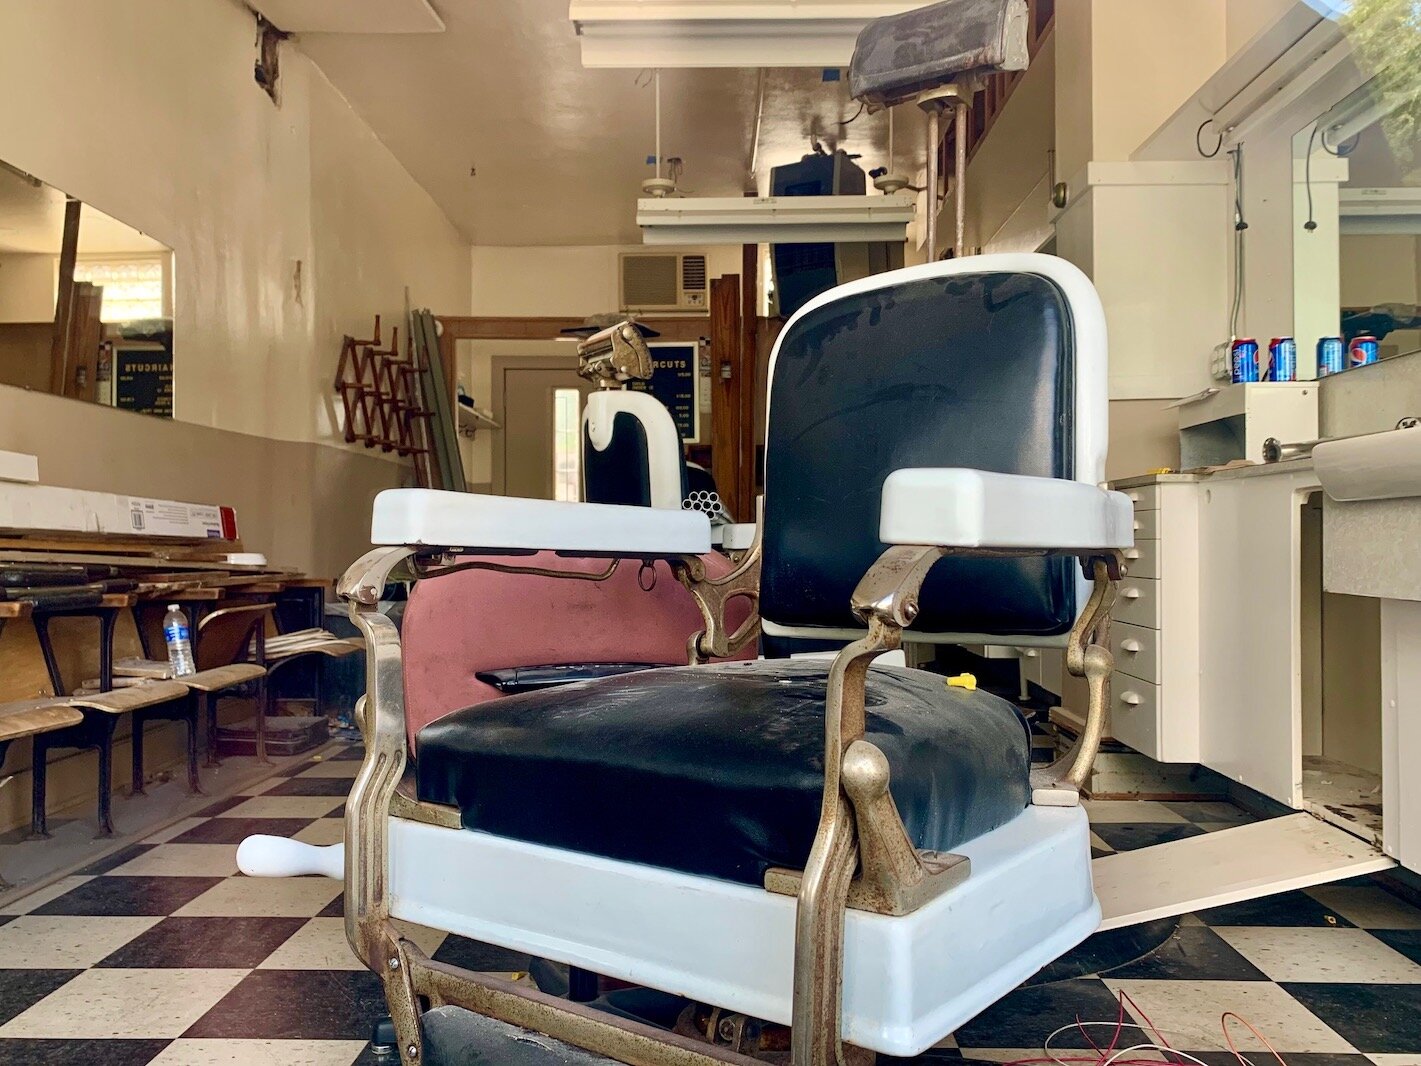 The former Bob’s Barber Shoo location in Edison Neighborhood will be renovated but is expected to become the home to another barber.